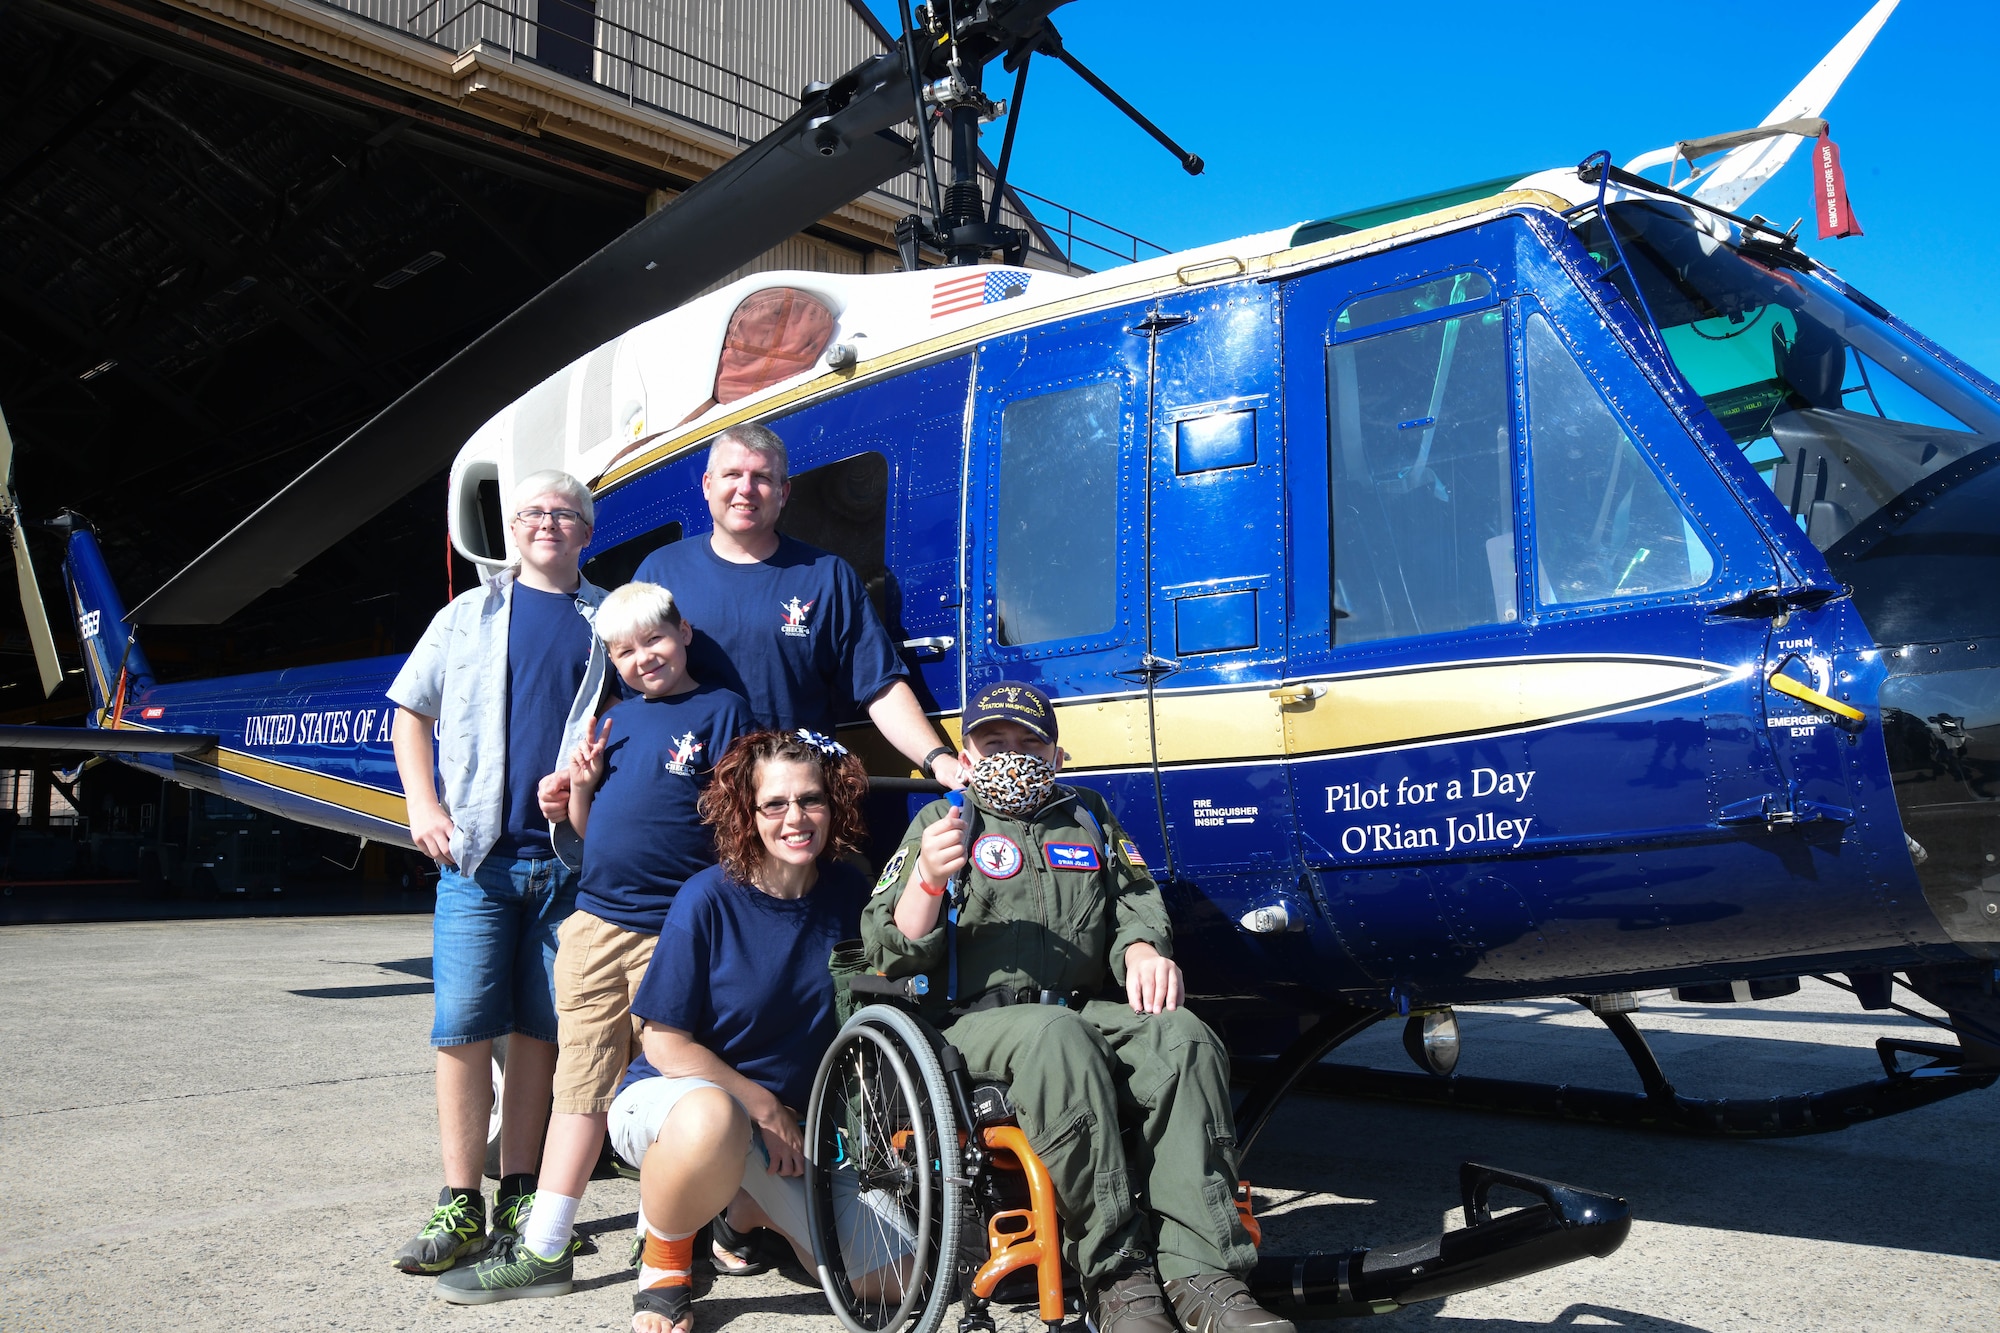 O’Rian Jolley, The Check-6 Foundation pilot for a day, and his family visit the 1st Helicopter Squadron on Joint Base Andrews, June 26, 2019. Diagnosed with hydrocephalus, severe gastro-esophageal reflux and most recently an extremely rare primary carnitine deficiency and mitochondrial diseases of the brain, O’Rian was selected to be an honorary pilot to experience a day at JBA and the National Harbor, with the help of The Check-6 Foundation and volunteer military and civilian members who work on JBA. (U.S. Air National Guard photo by Erica Flores)